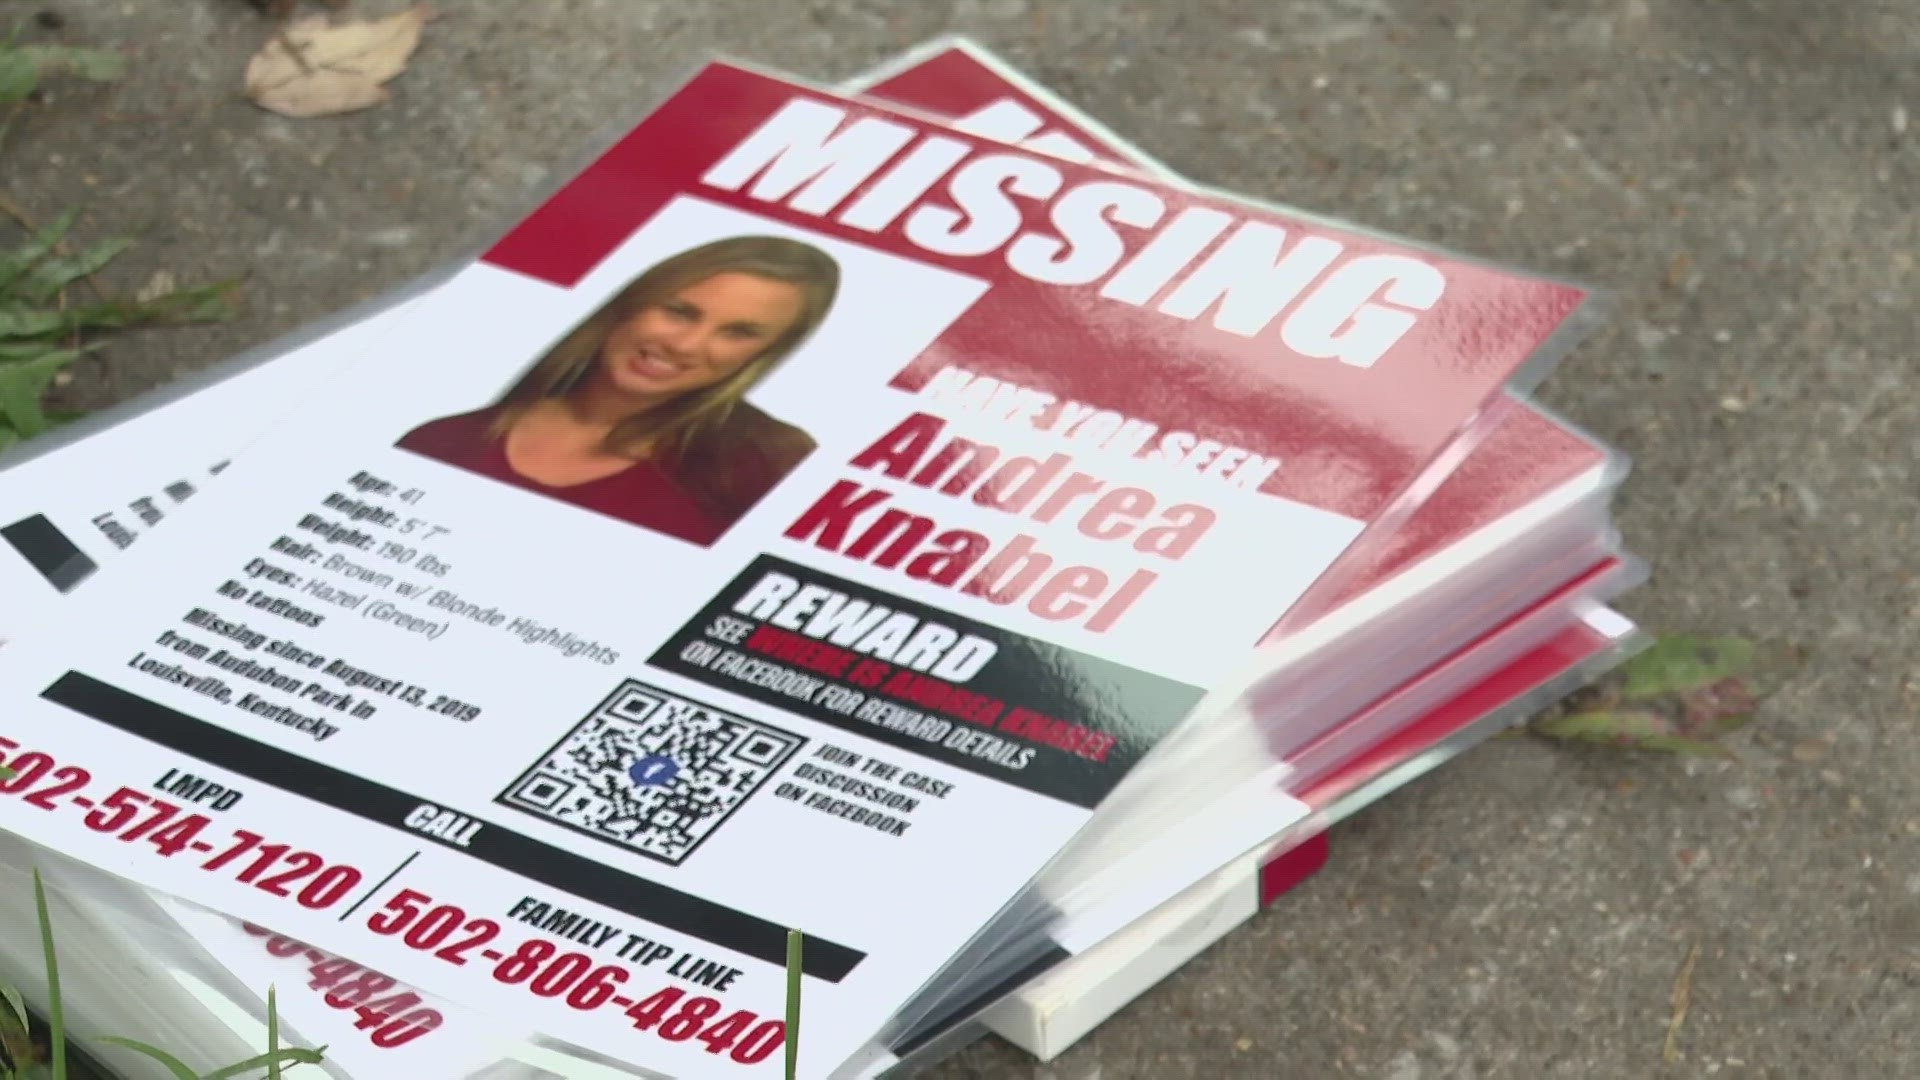 Knabel has been missing since 2019, and family members continue to remain optimistic as some leads have have not panned out.